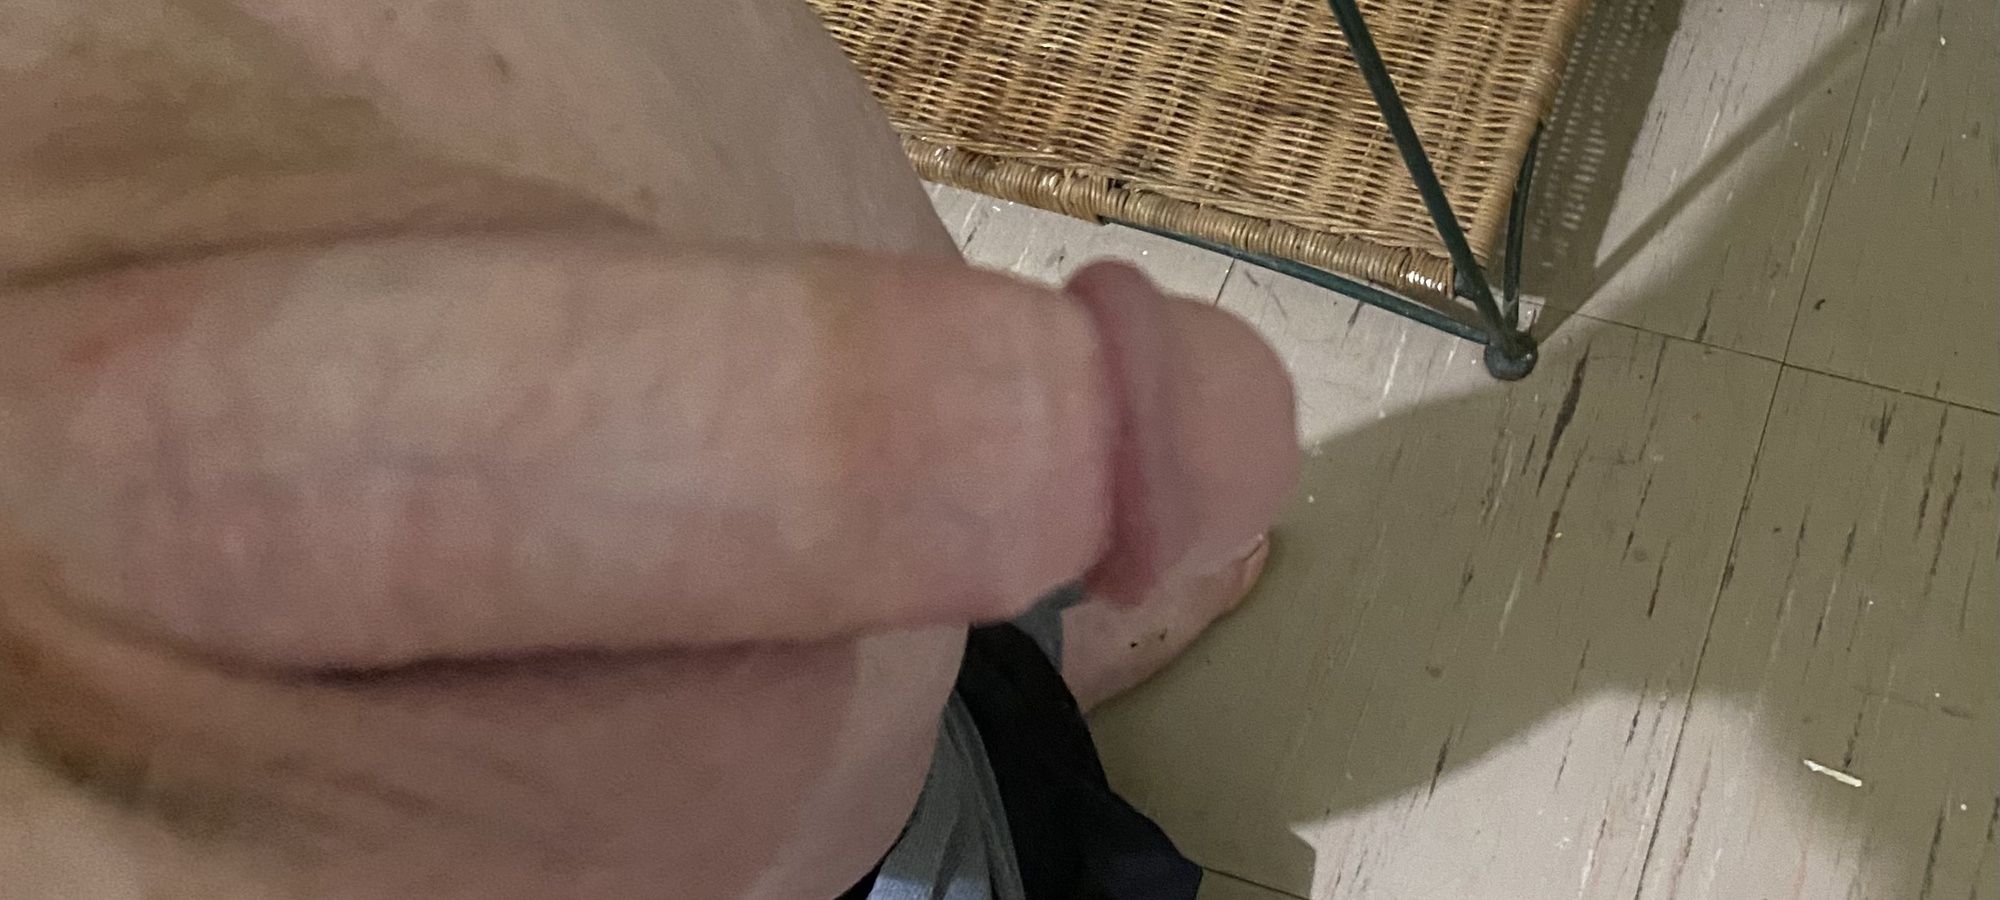 Cock #2